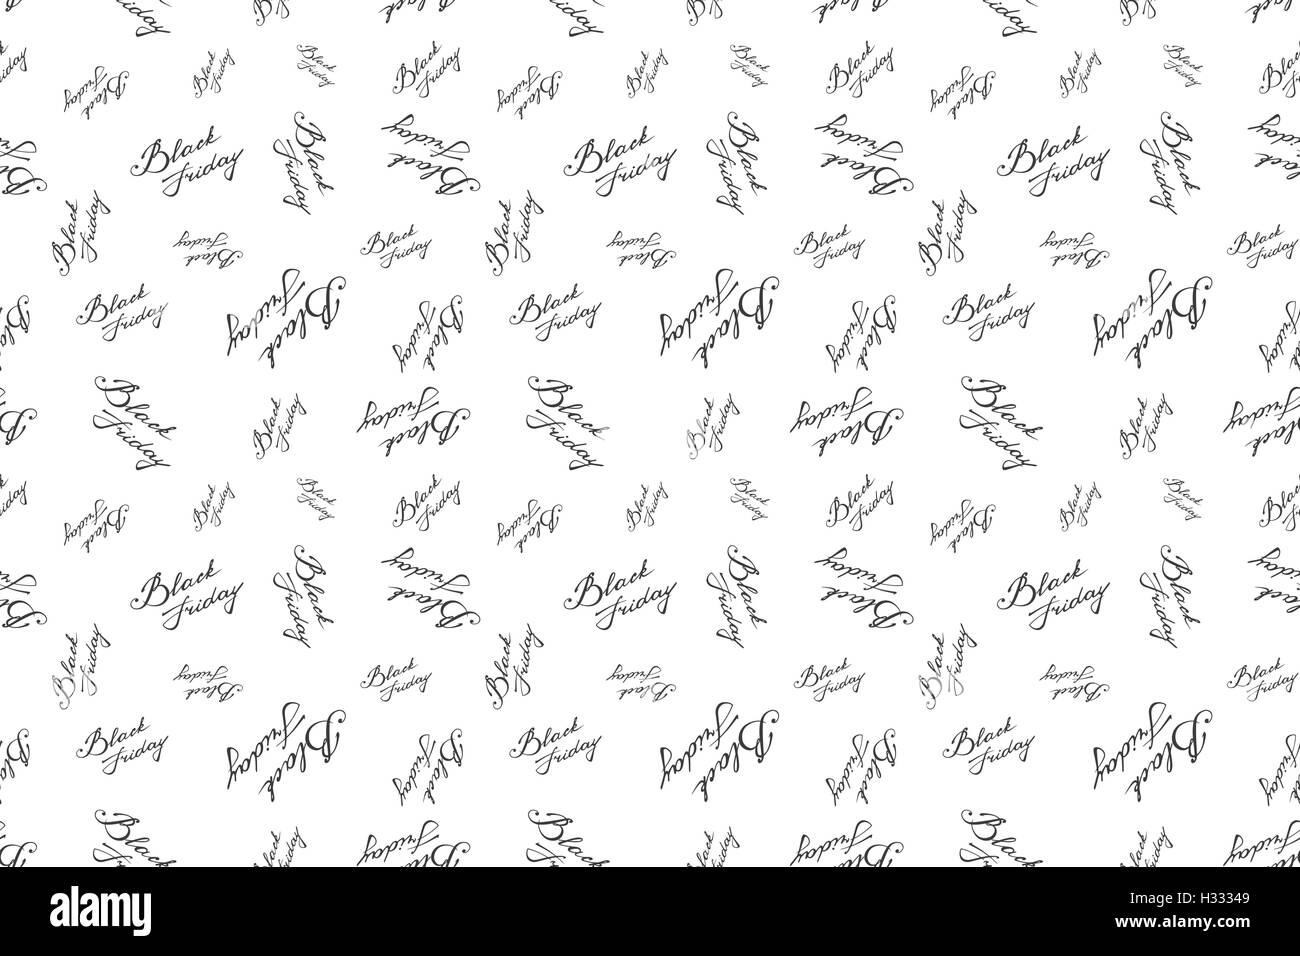 Black Friday seamless pattern. Black and white background. Lettering. Vector Stock Vector